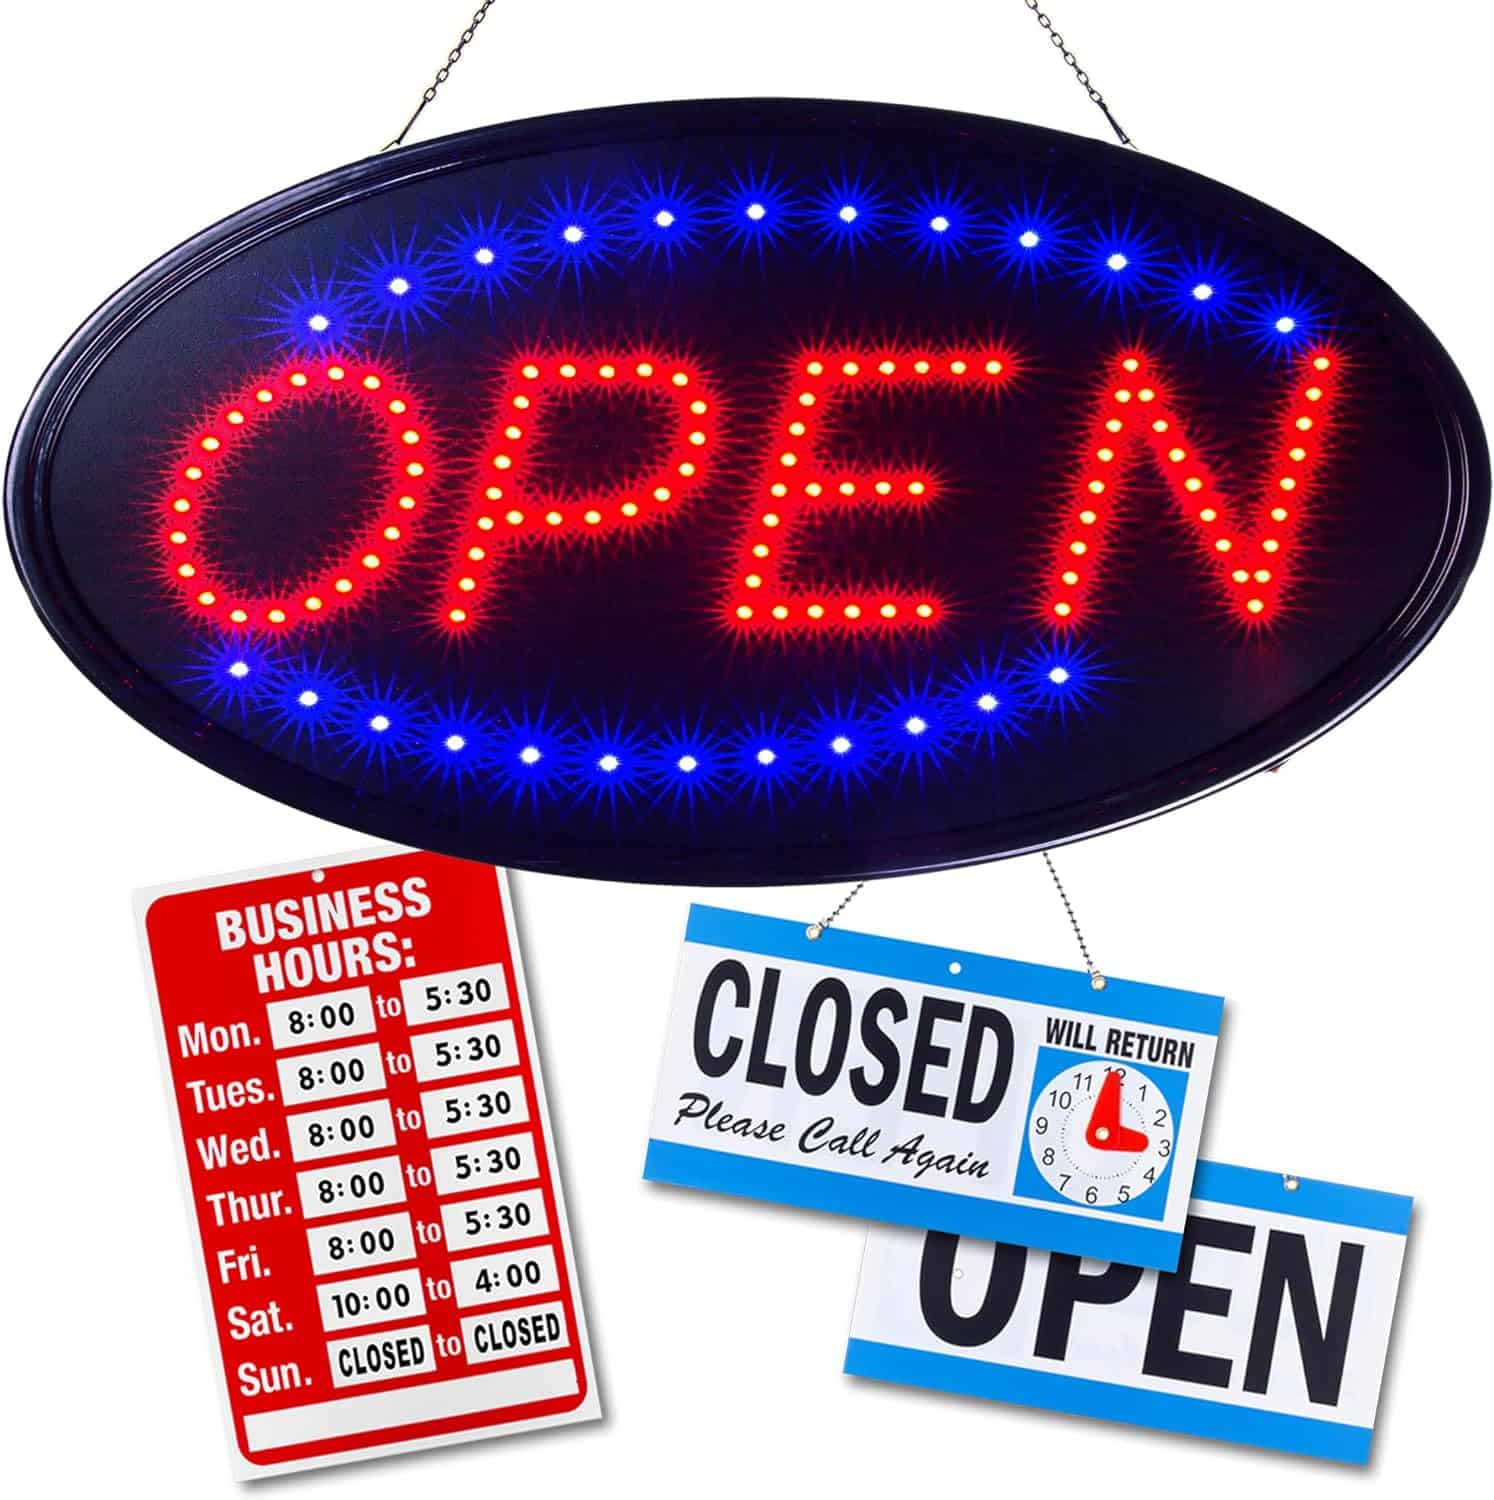 Ultima LED Neon Open Sign for Business: Lighted Sign Open with Flashing Mode – Indoor Electric Light up Oval Sign for Stores (19 x 10 in) Includes Business Hours and Open  Closed Signs